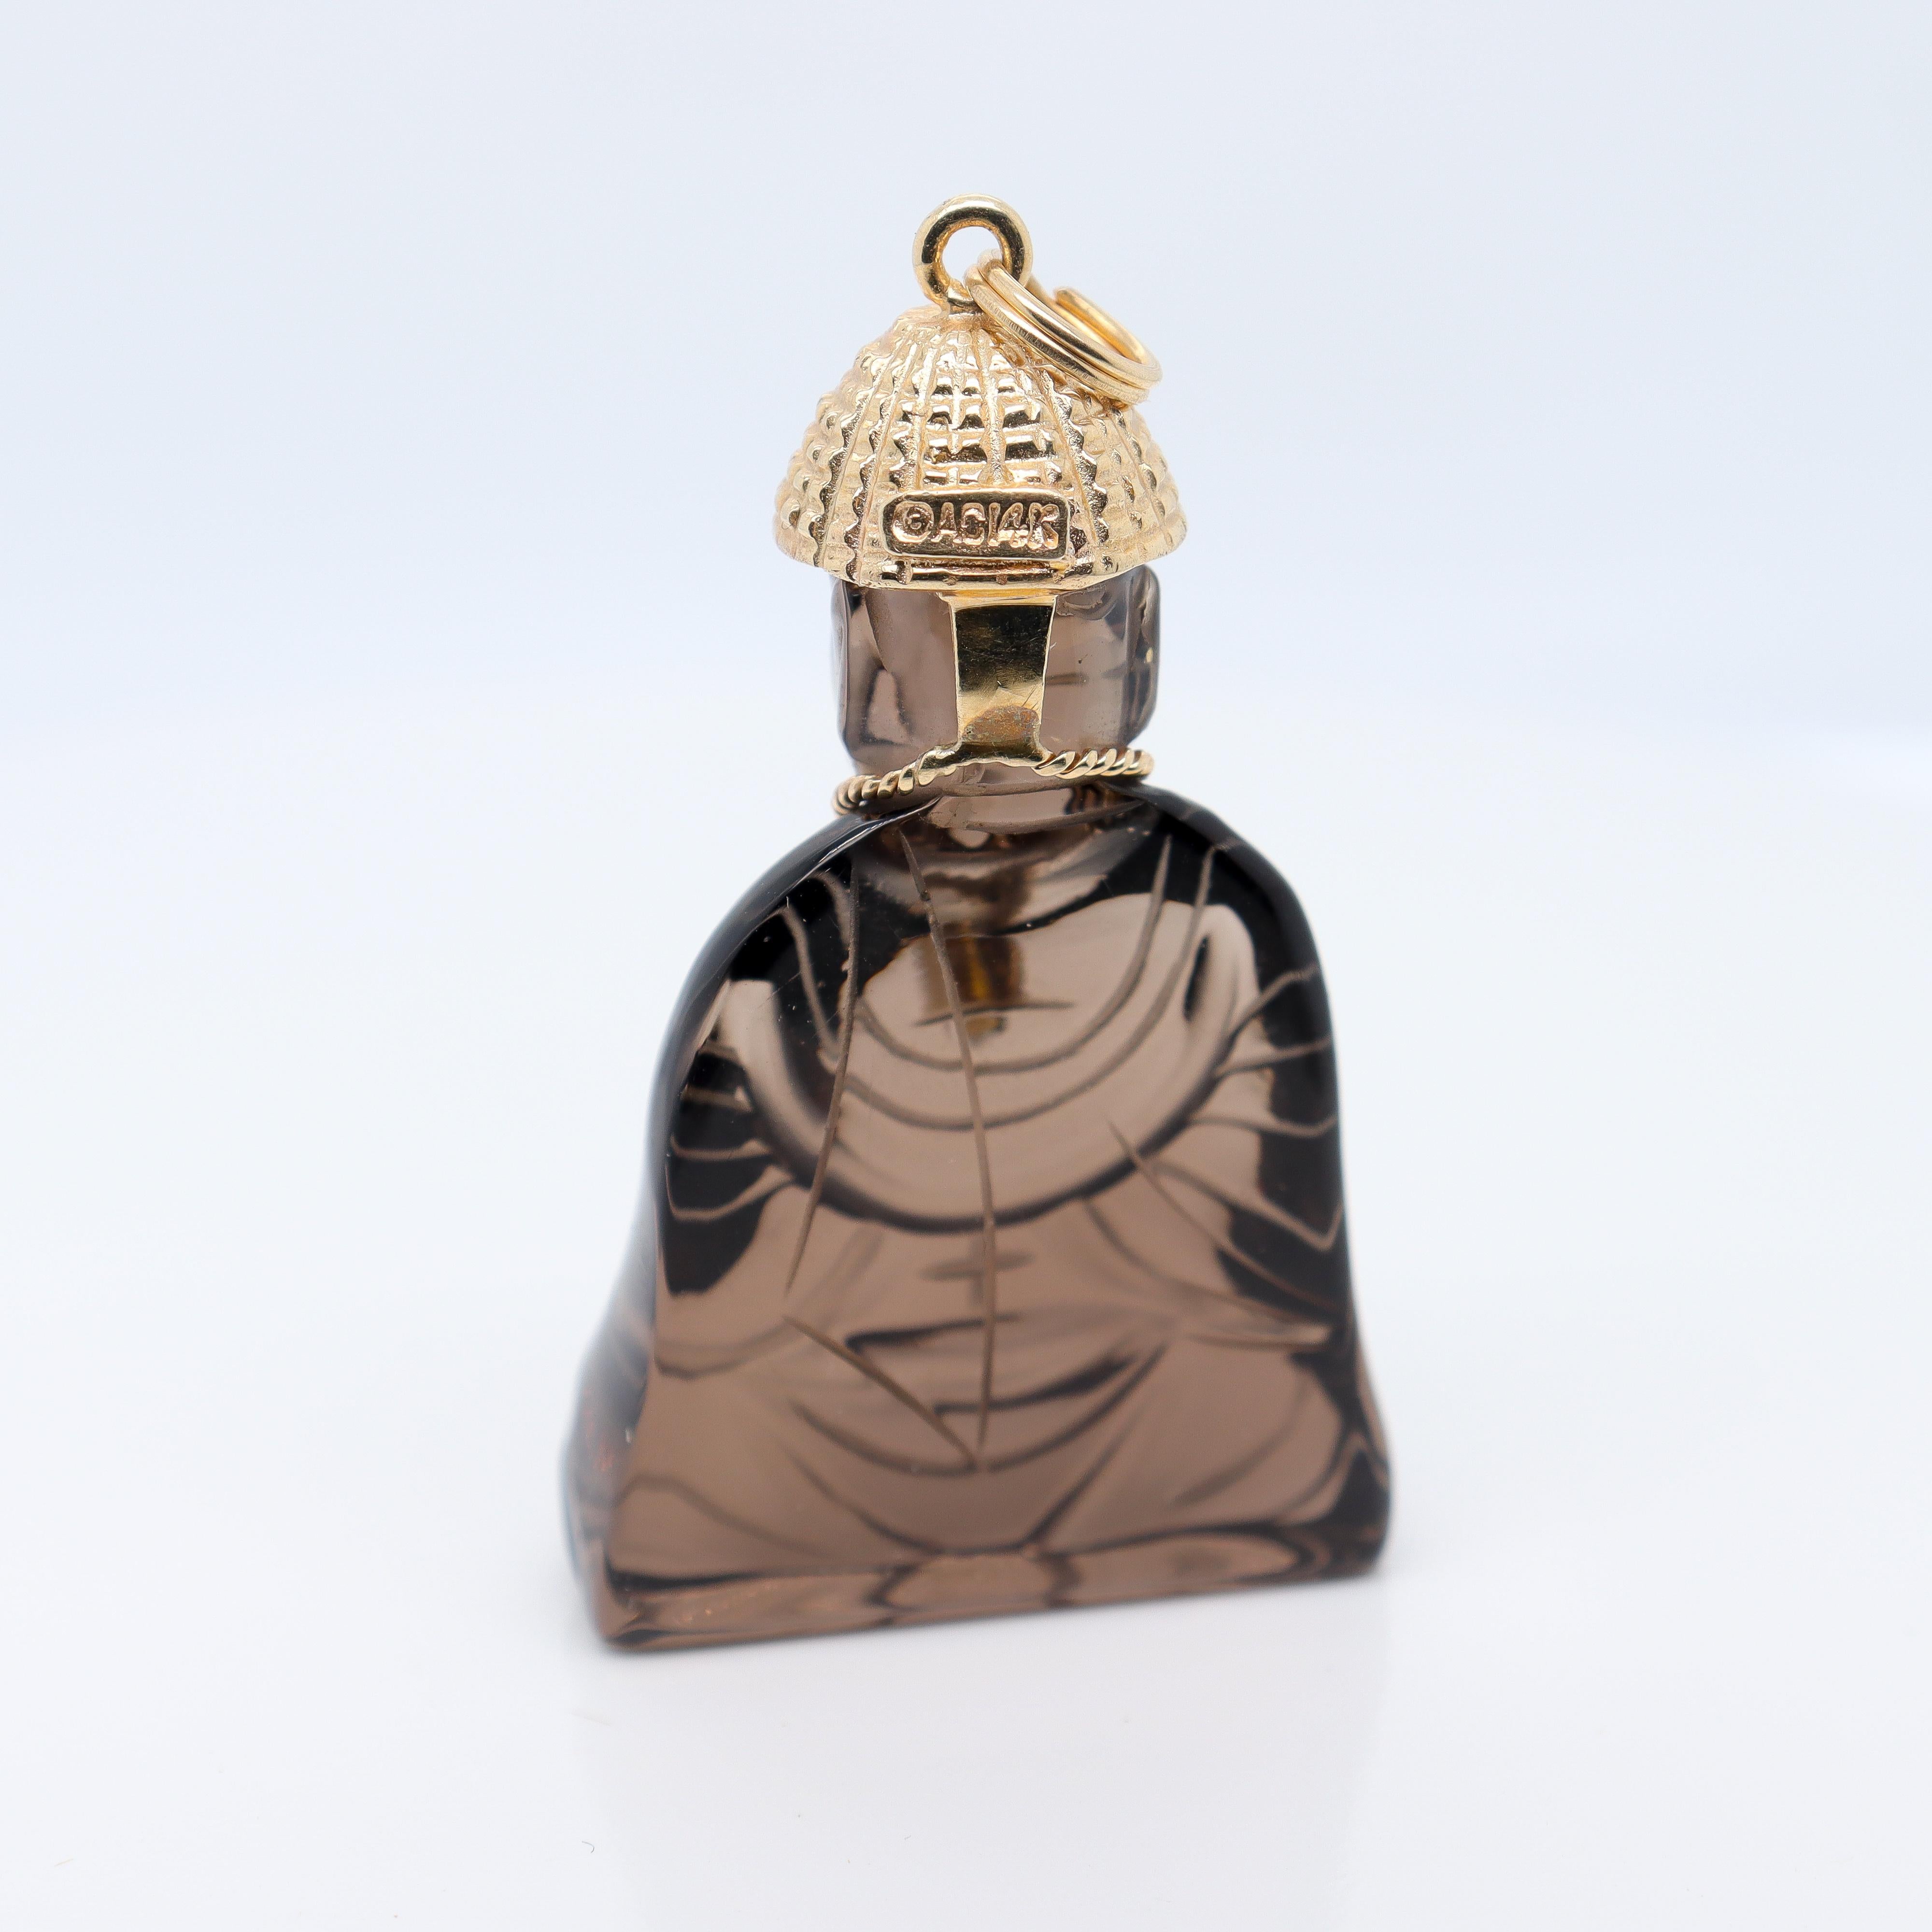 Retro Signed 14k Gold, Smoky Quartz, & Seed Pearl Carved Buddha Charm or Pendant For Sale 4